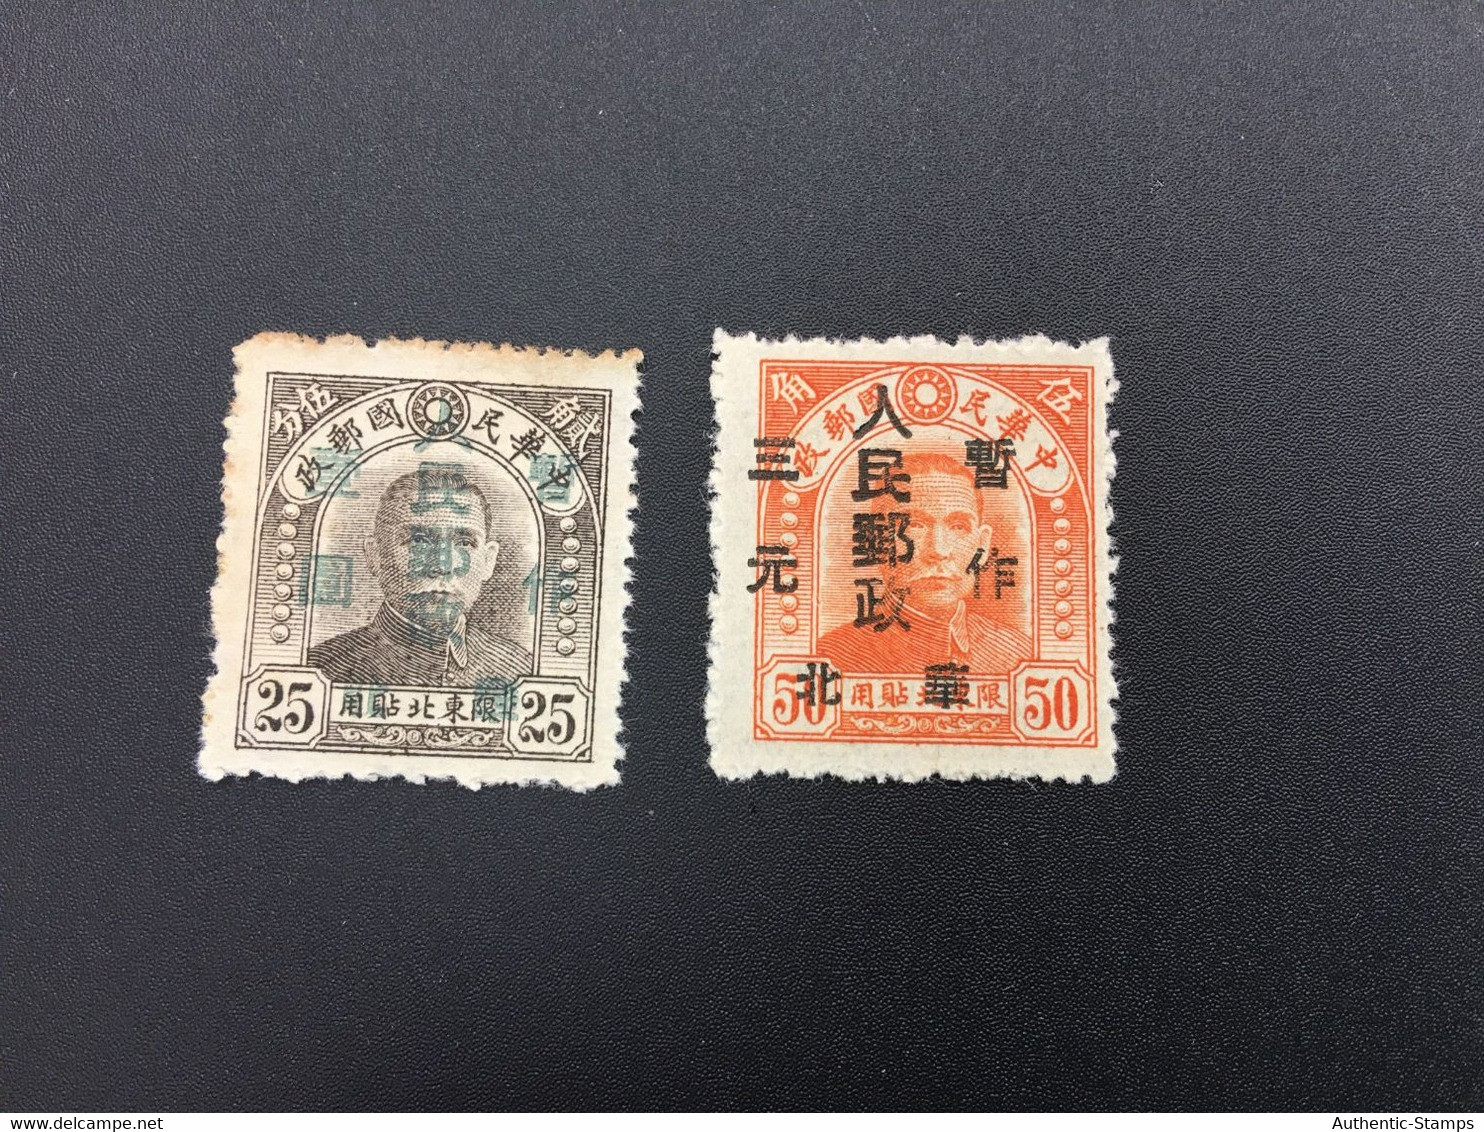 CHINA STAMP, SET, LIBERATED AREA, UNUSED, TIMBRO, STEMPEL, CINA, CHINE, LIST 6327 - Nordchina 1949-50